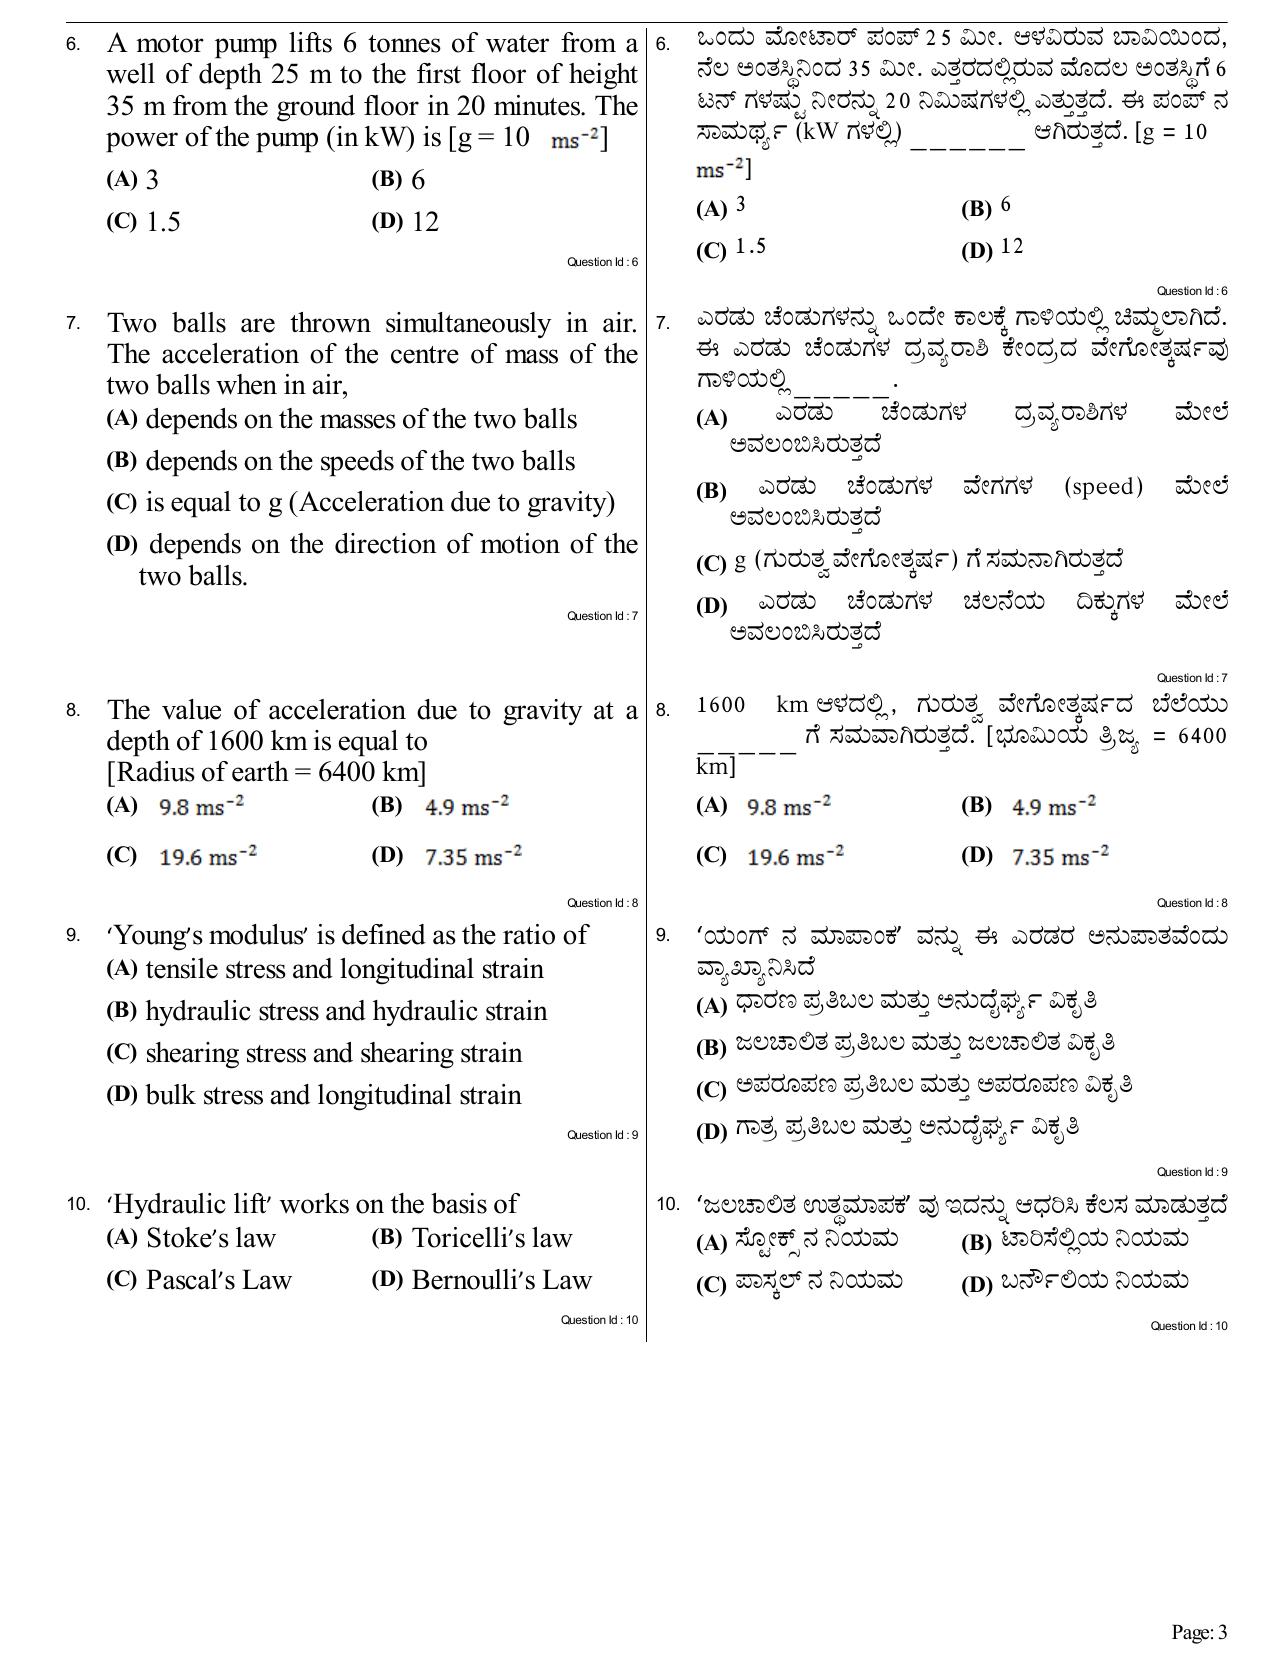 KCET Physics 2017 Question Papers - Page 3